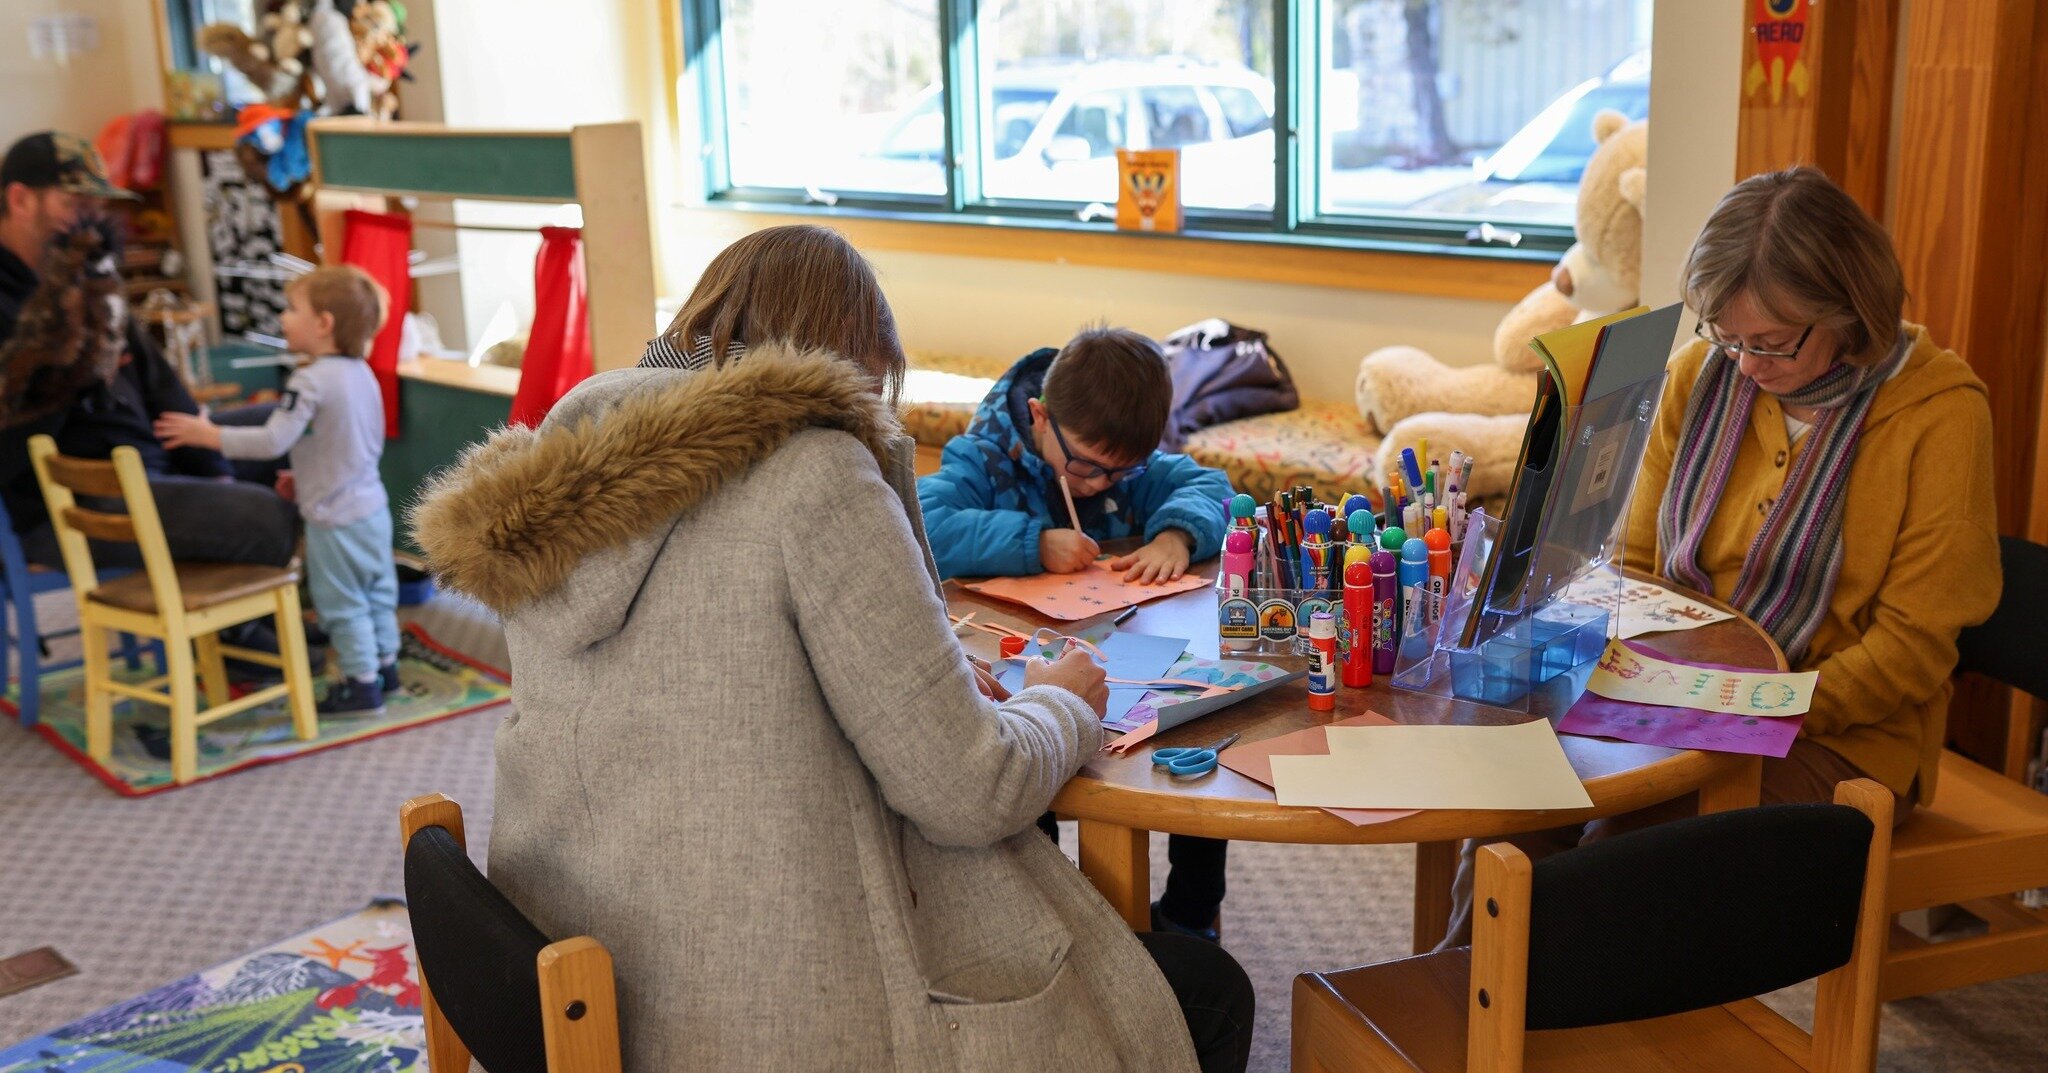 Beat the winter blues at @doorcountylibrary Sister Bay/Liberty Grove Library! Dive into a captivating book or get creative with the kids in their cozy space. Winter days have never been so inviting! ❄️📚

#DoorCountyLibrary #SisterBay #DoorCounty #Si